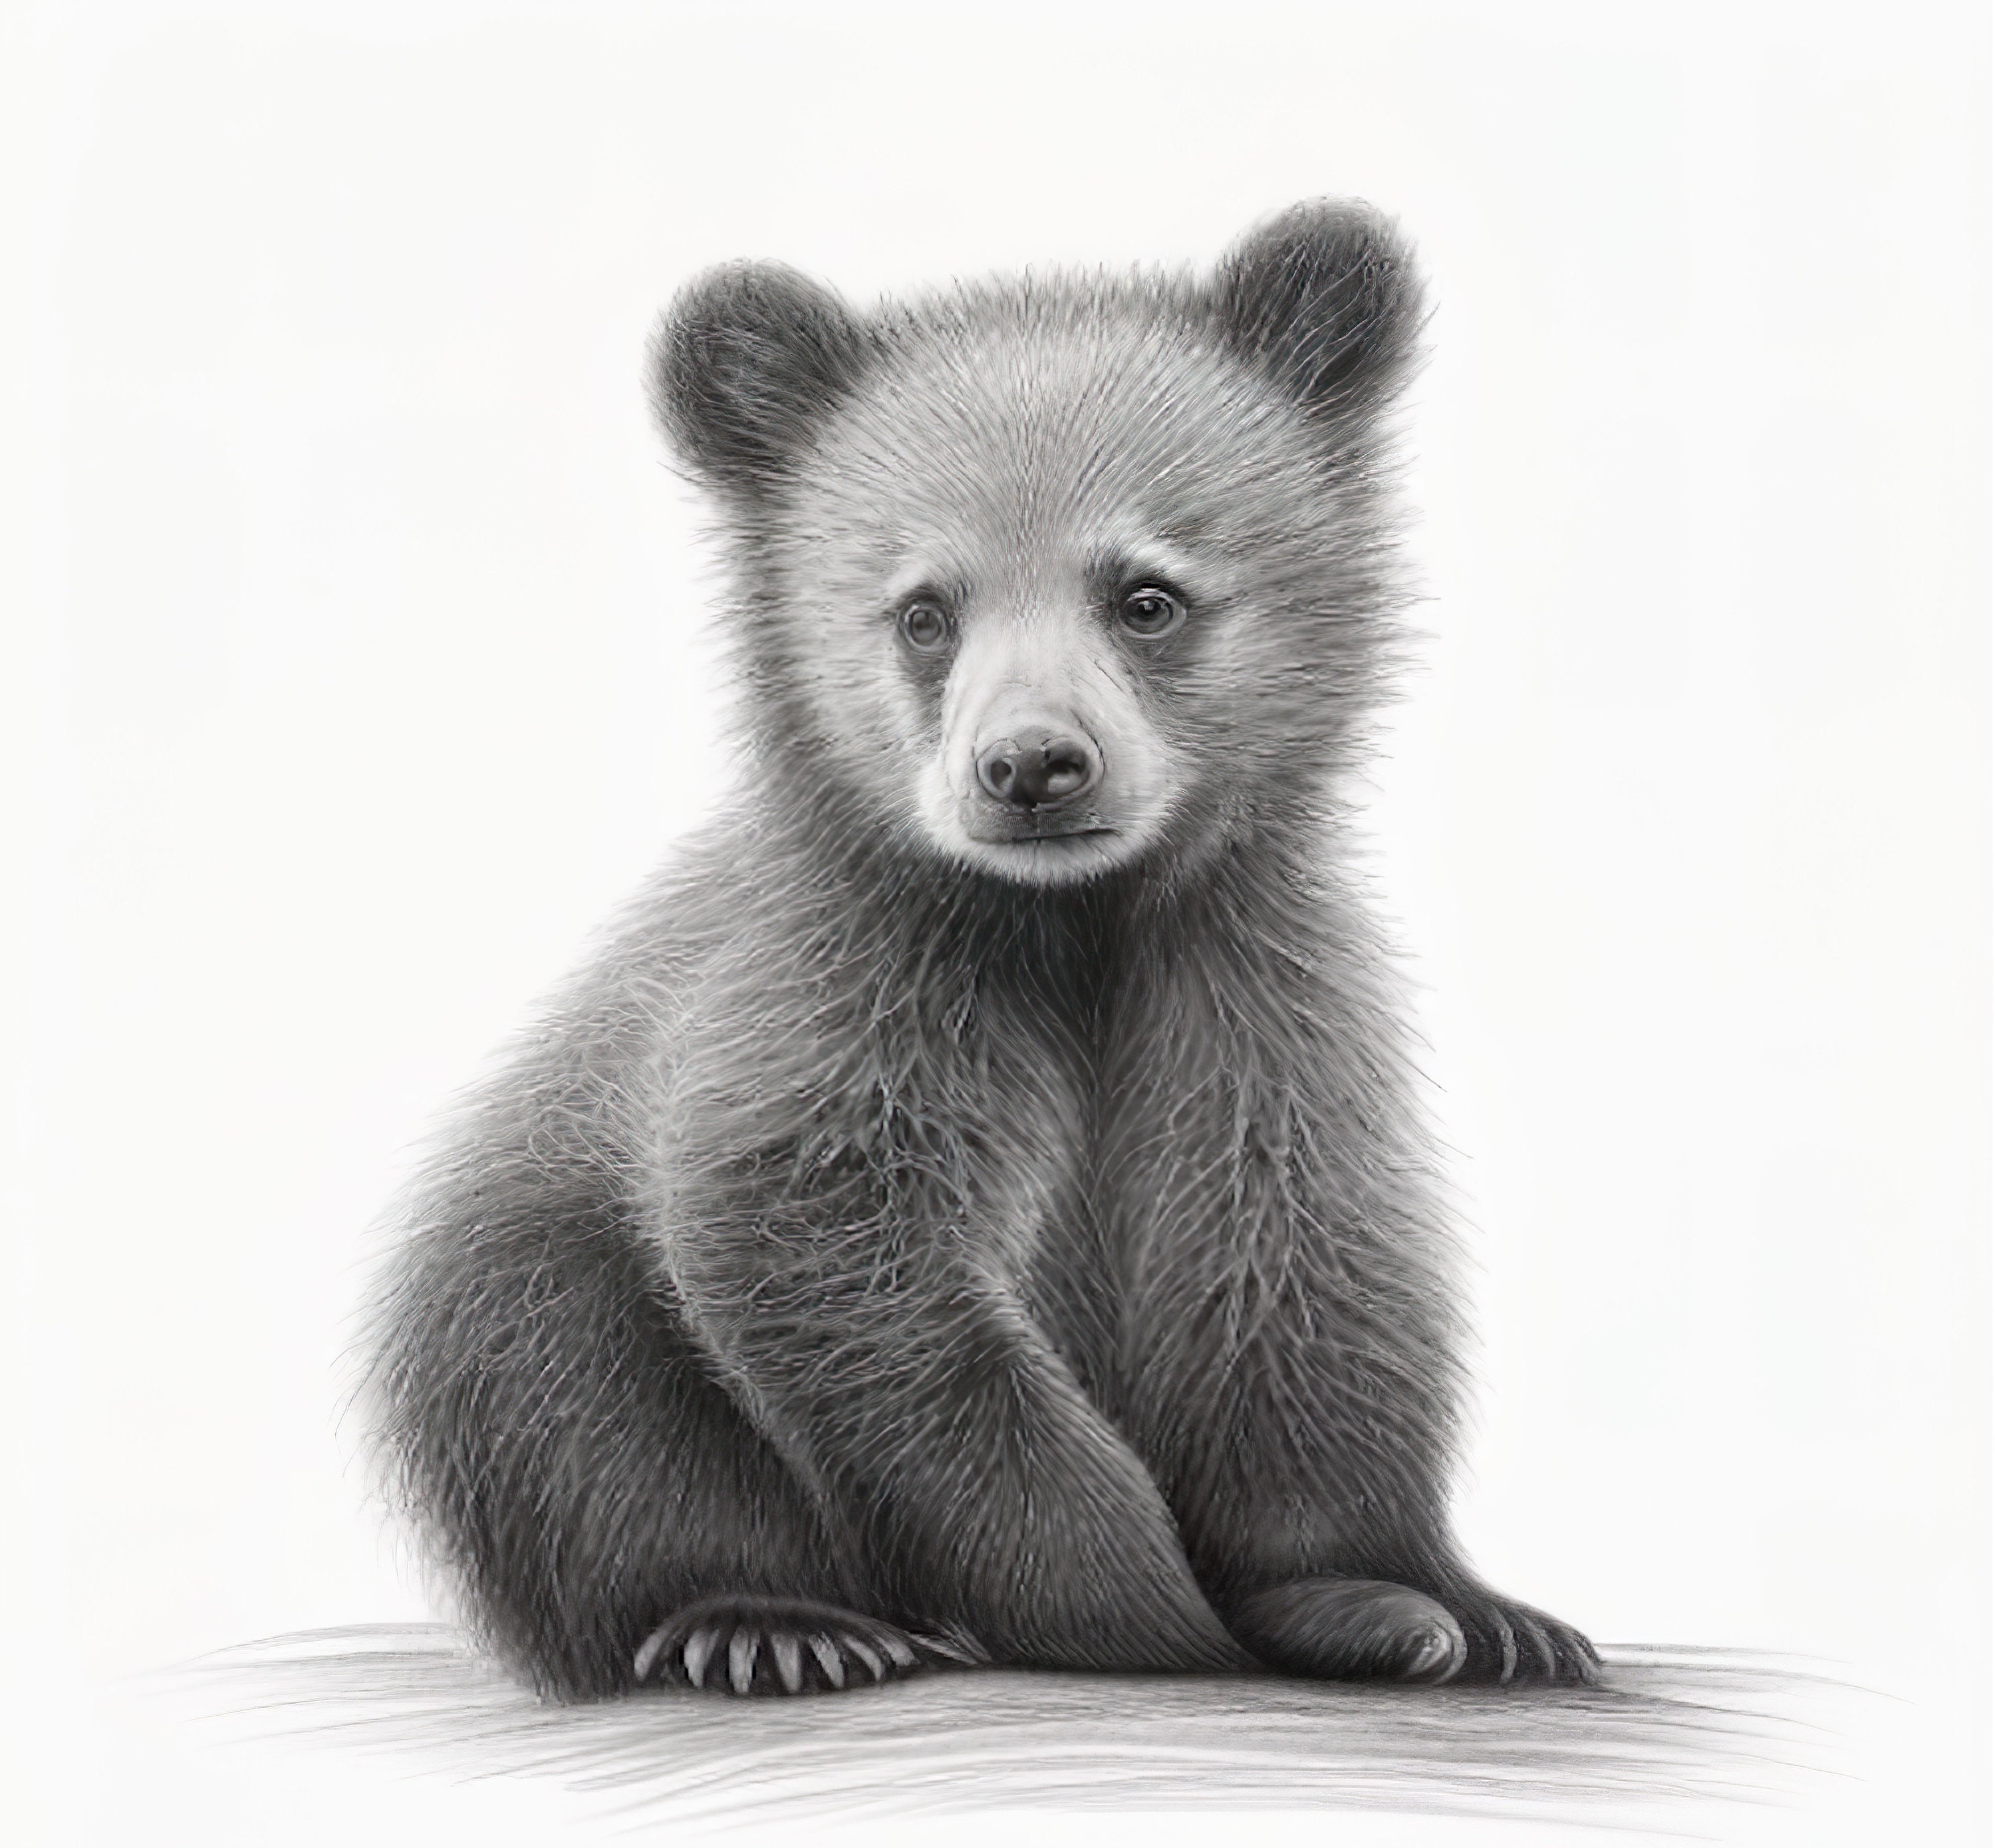 How To Draw A Cub For Kids Step by Step Drawing Guide by Dawn  DragoArt